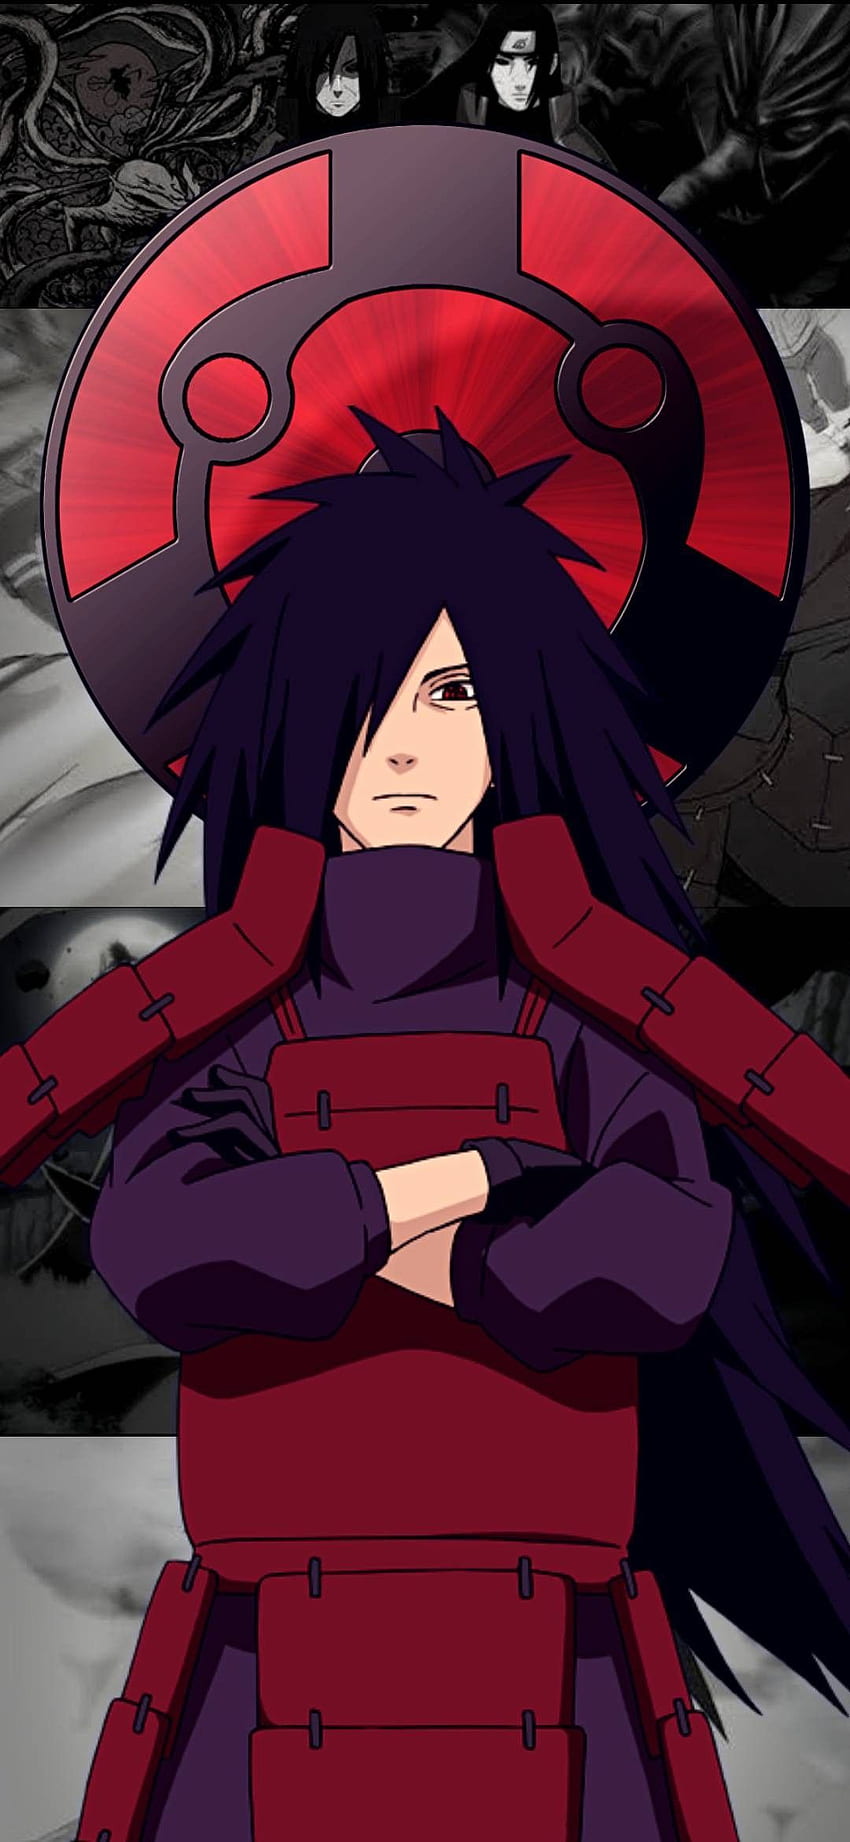 What are some fun facts about Madara? - Quora